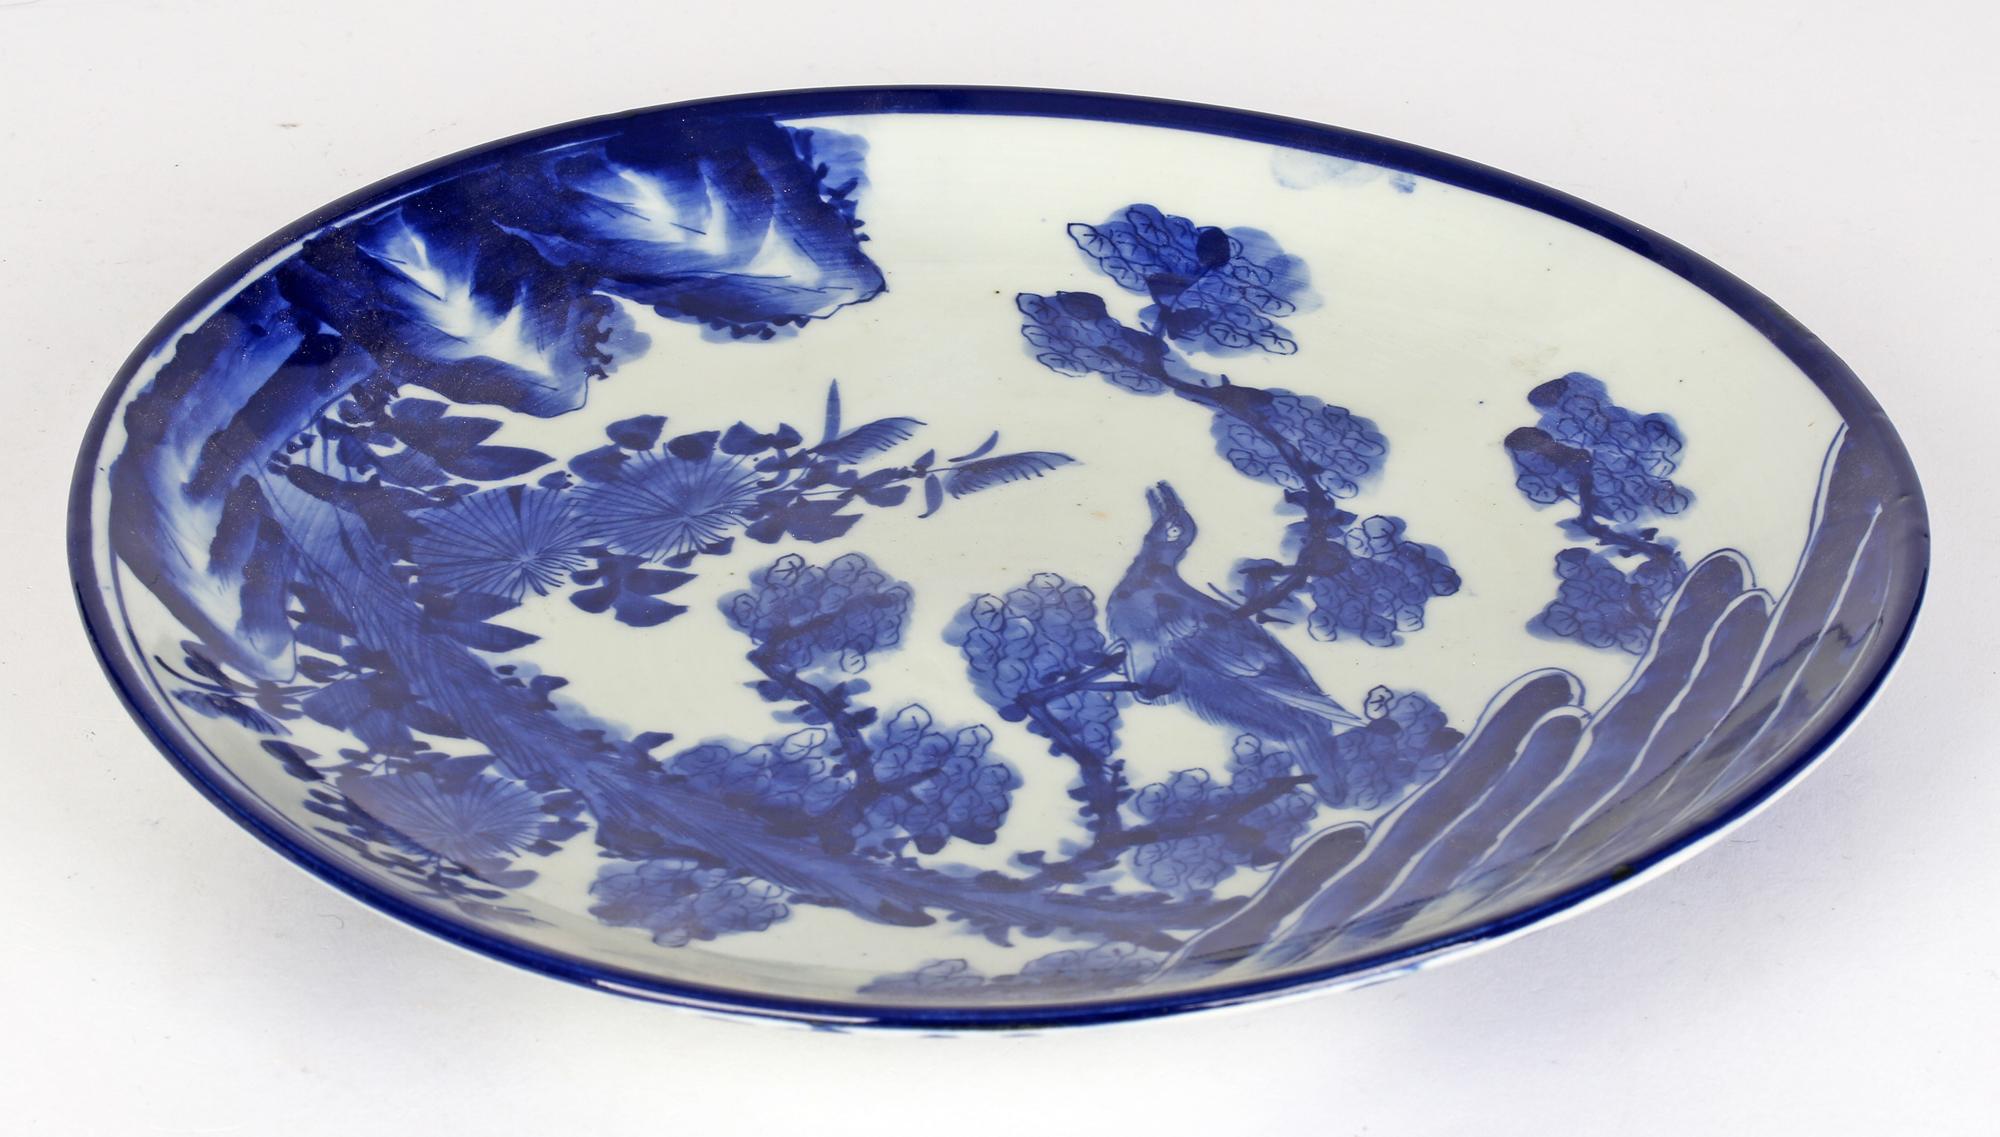 A fine decorative antique Japanese Meiji period porcelain plate hand painted with a bird in a landscape dating between 1868 and 1912. The large round plate with a slightly raised rim is hand painted in blue on a white ground with a large bird